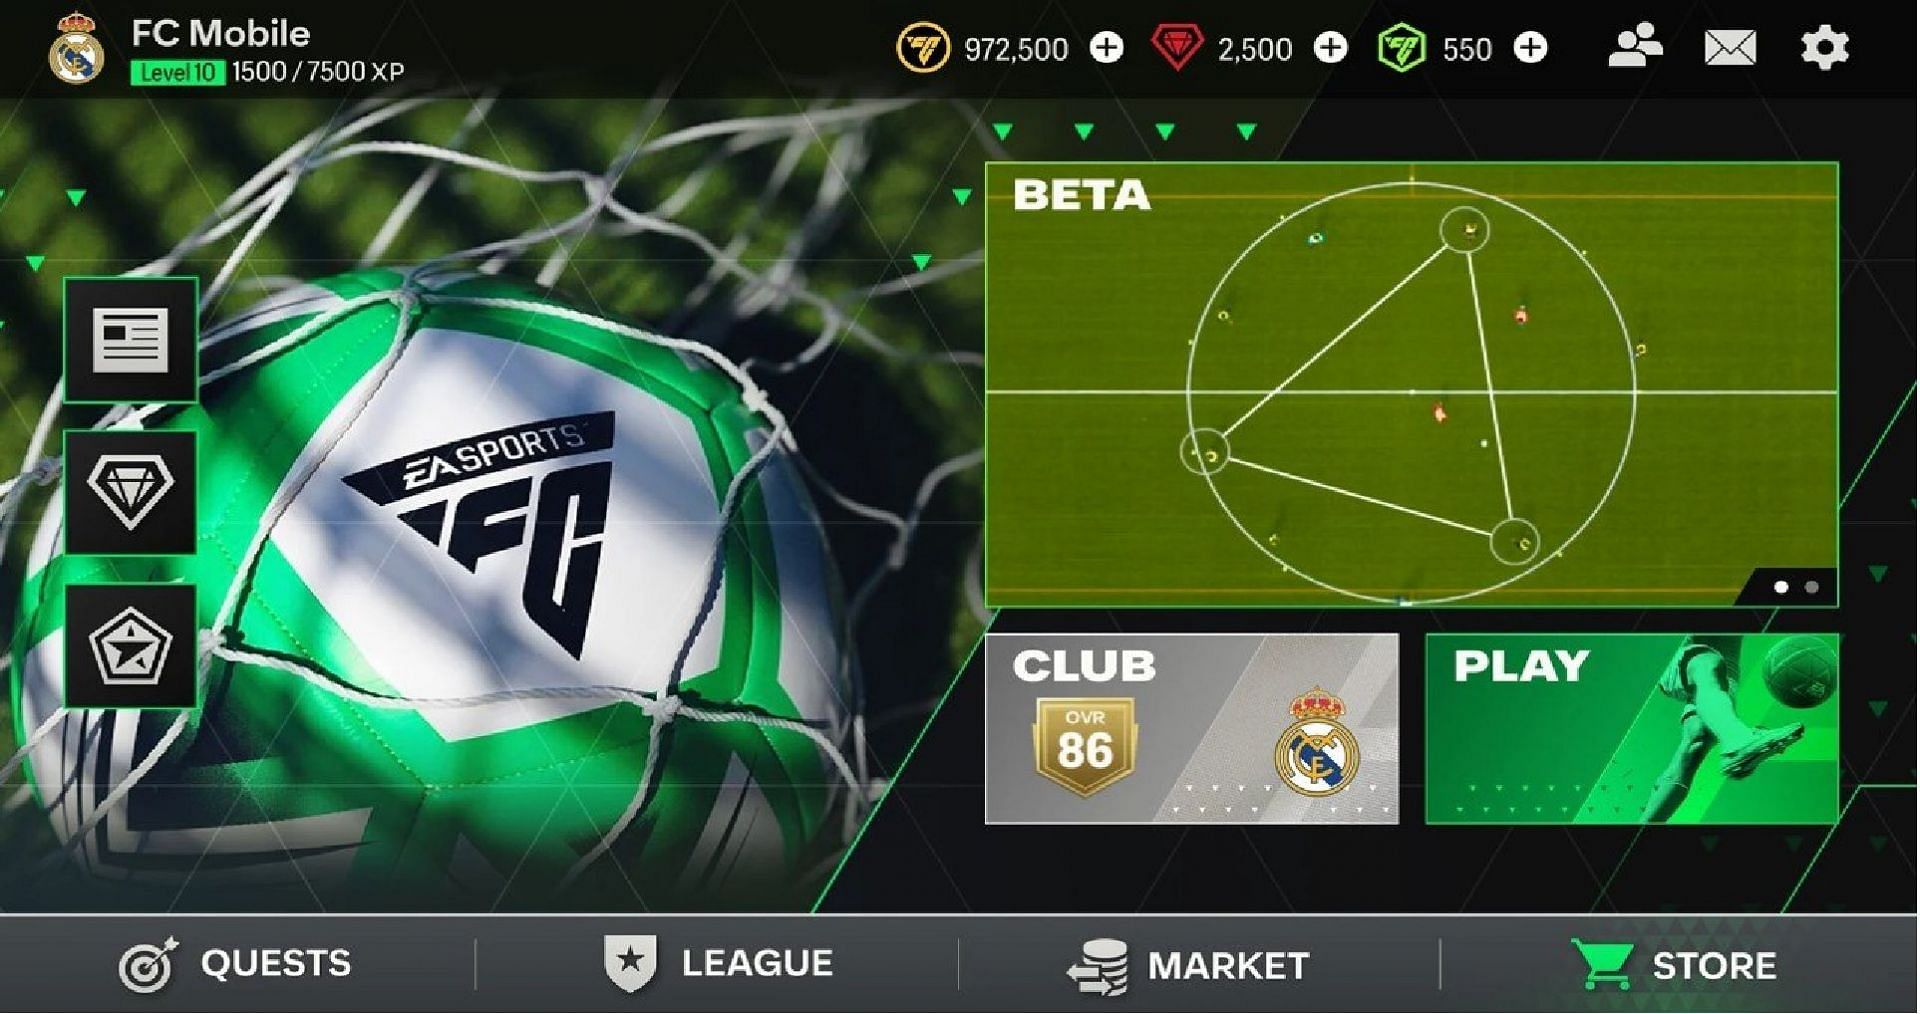 are we keeping the ea fc 24 mobile points when the beta is version